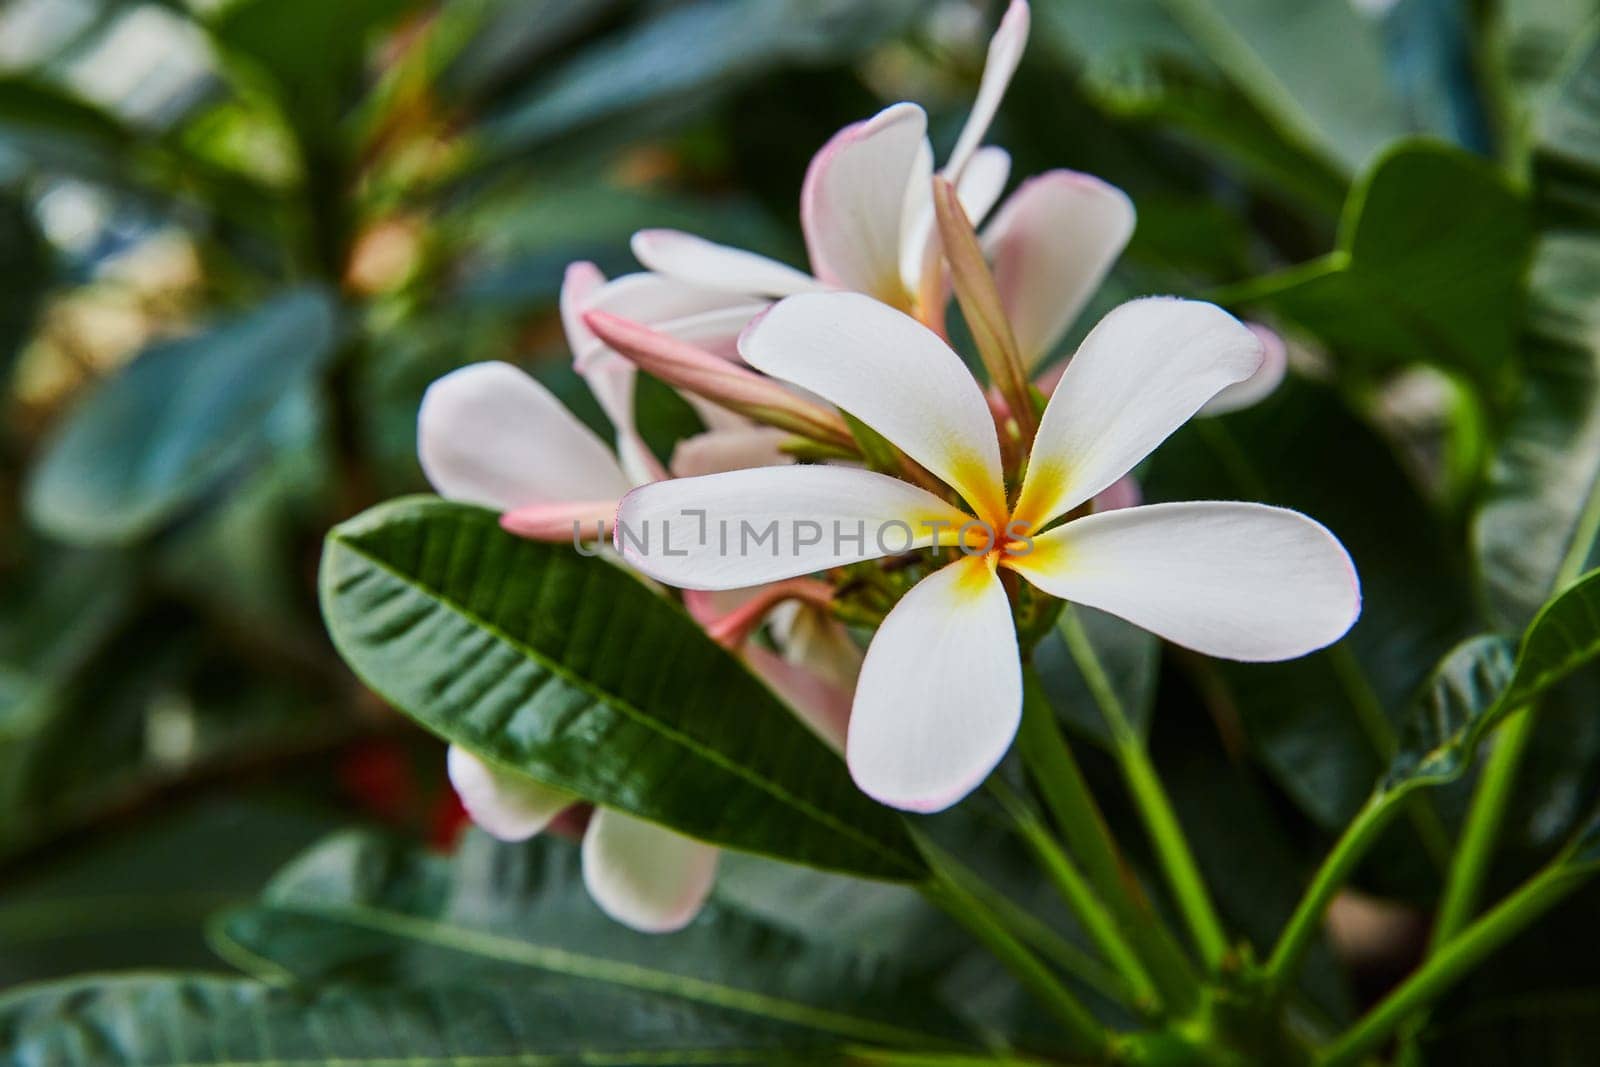 Vibrant Plumeria Bloom with Pink Gradient Petals and Lush Foliage Close-Up by njproductions